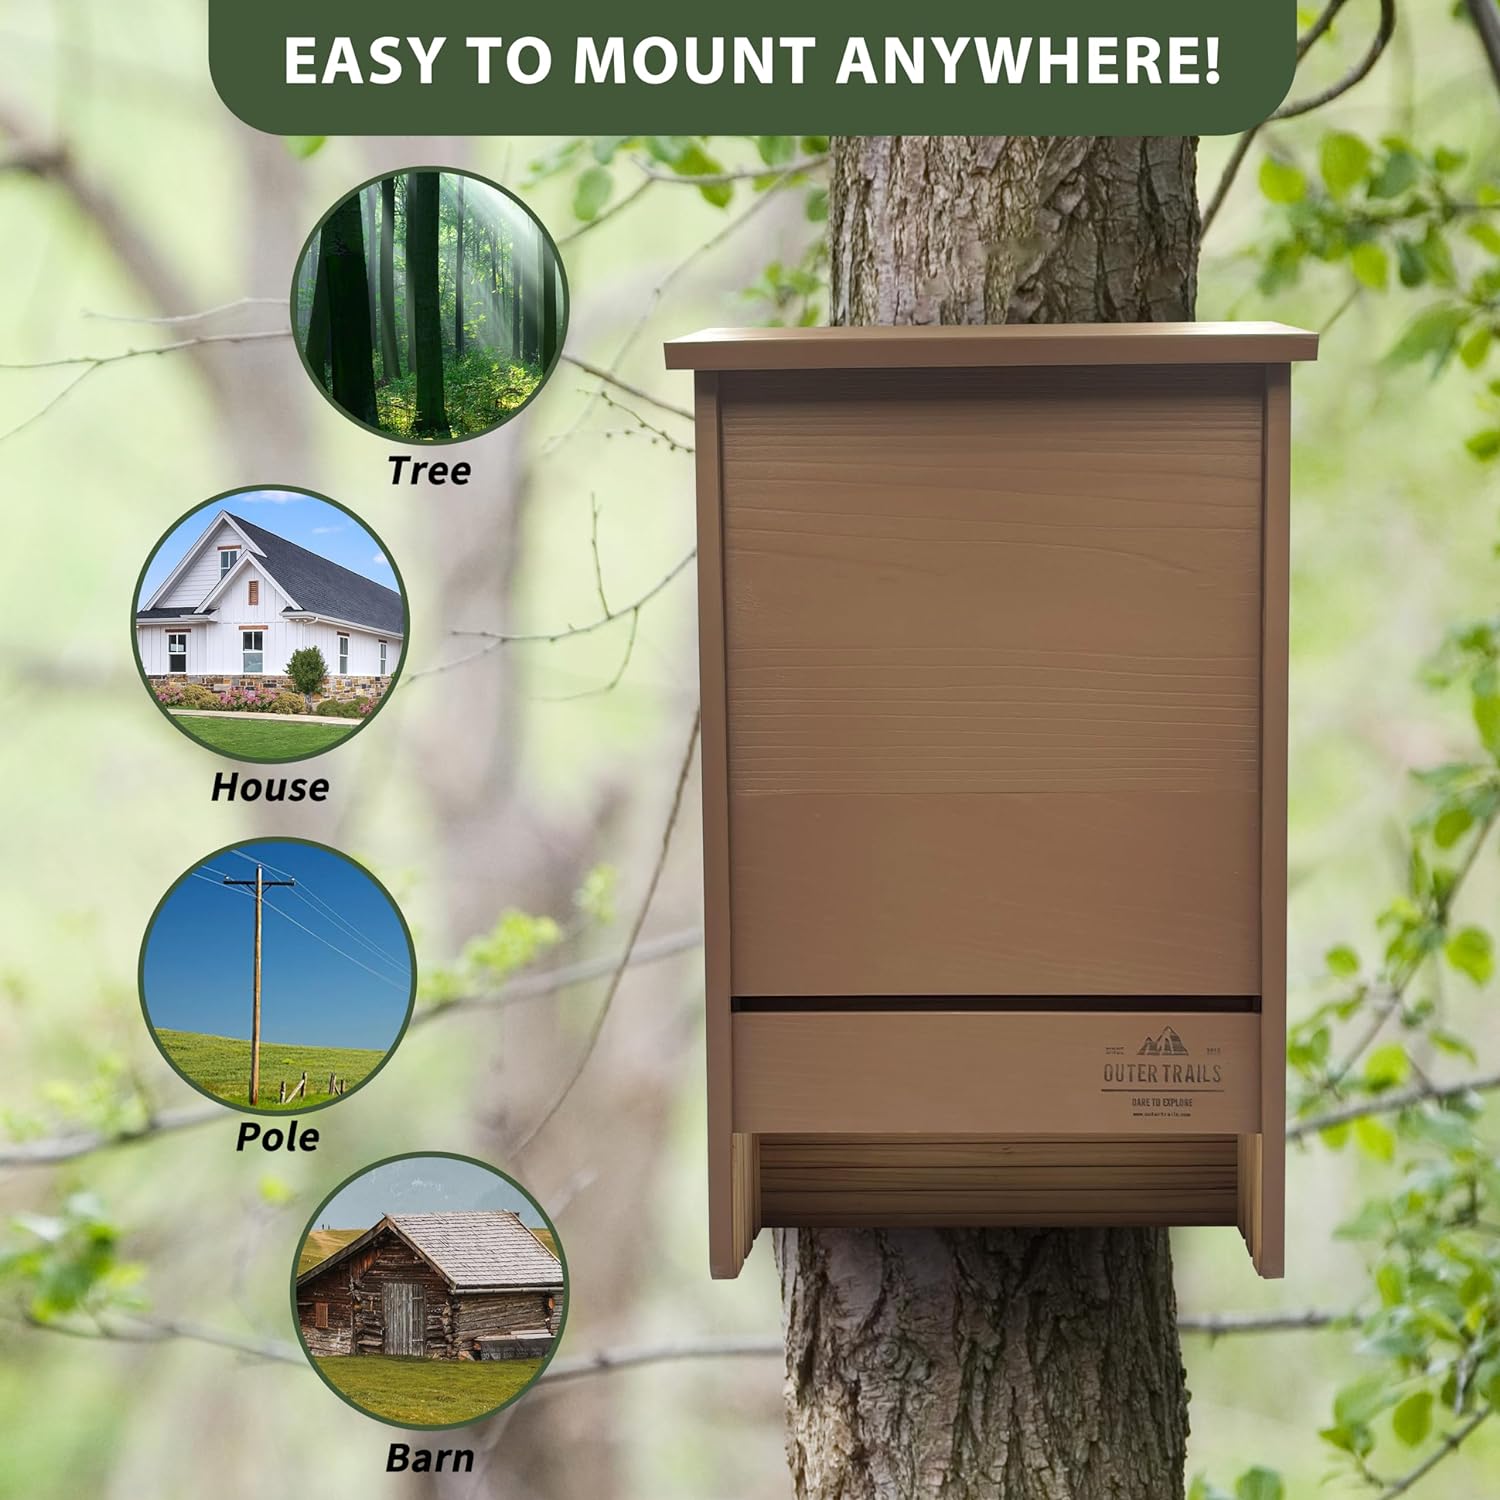 Illustration on Outer Trails™ bat house showcasing various locations it can be mounted